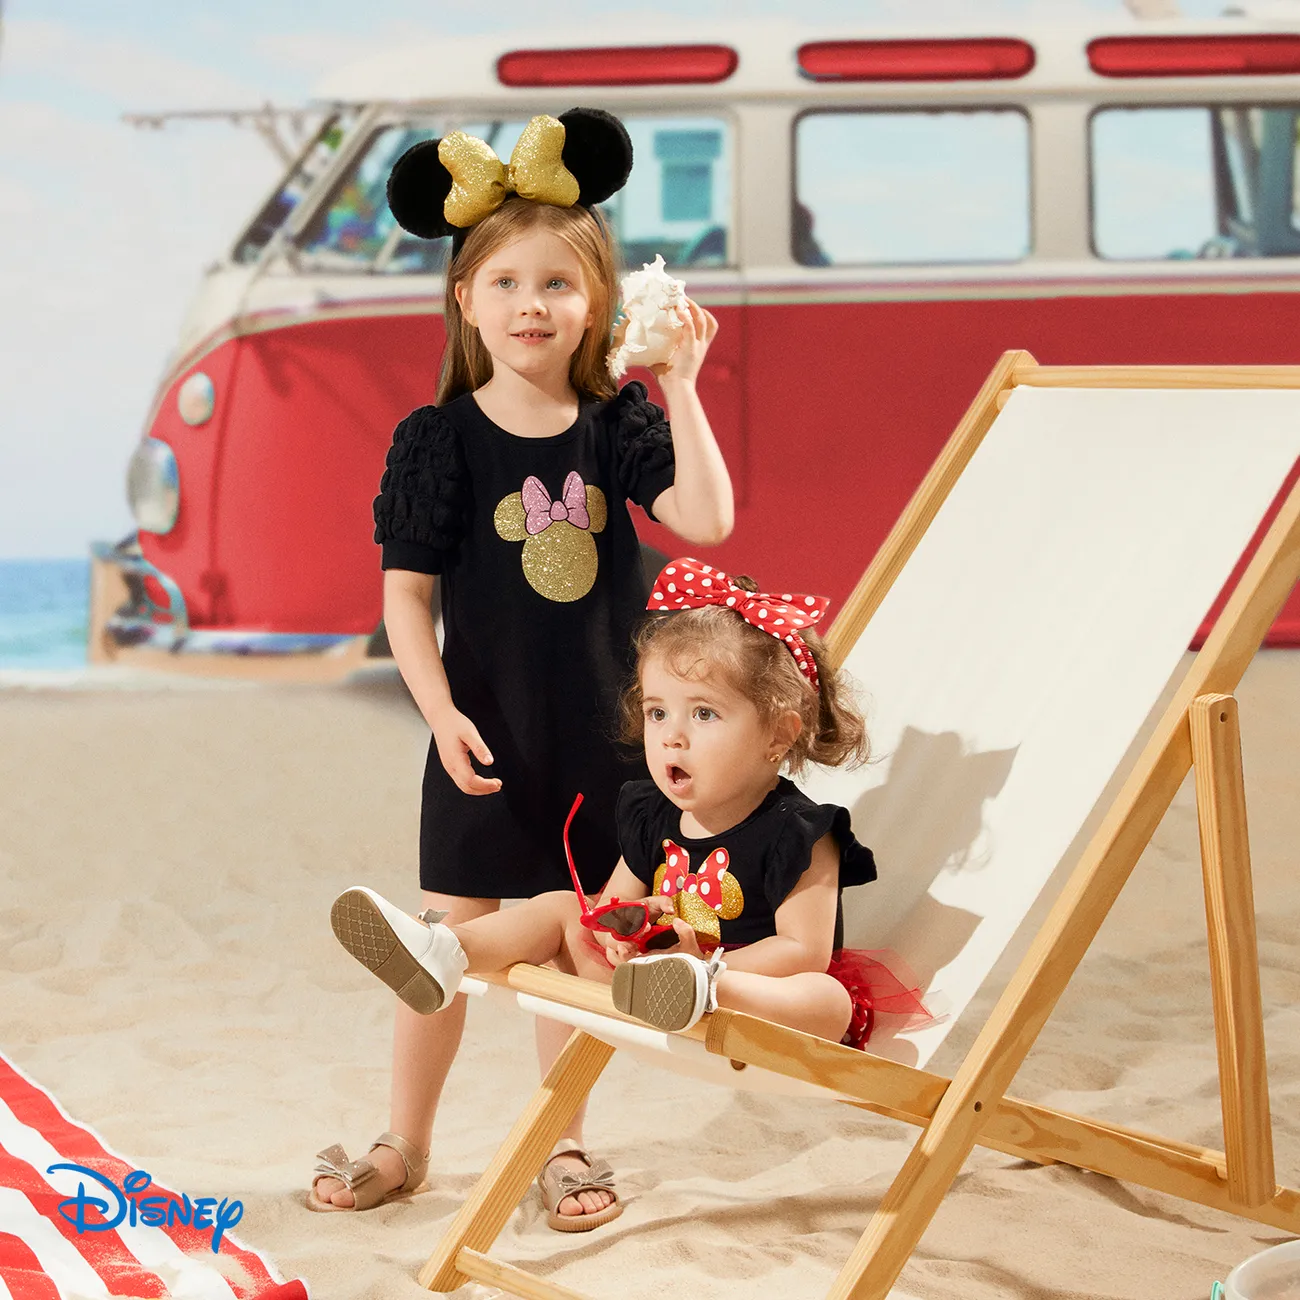 Disney Mickey and Friends Family Matching Black Cotton Short-sleeve Graphic Dress or Tee Black big image 1